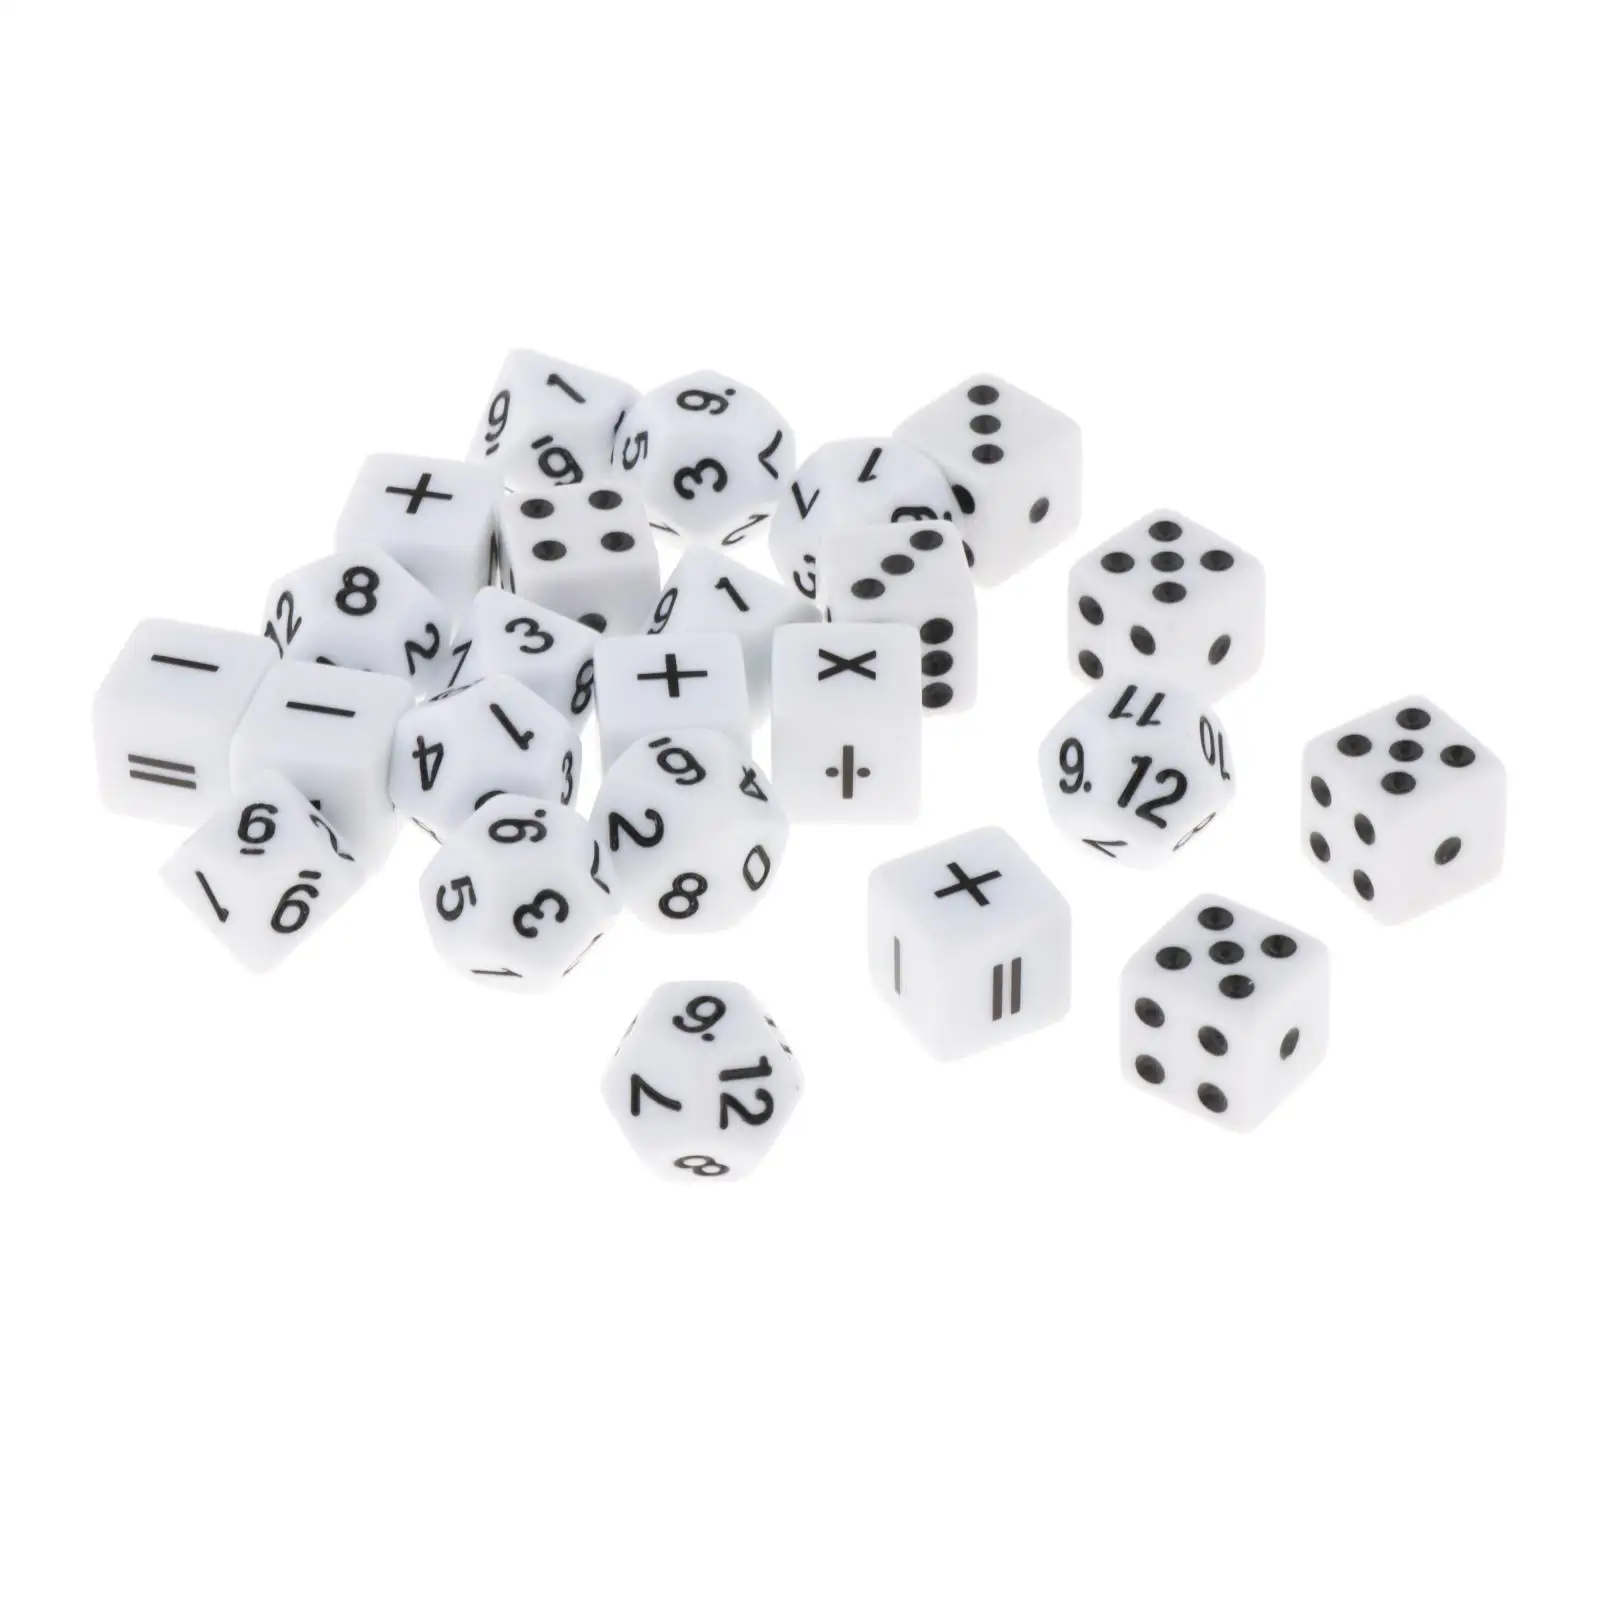 Pack of 24 Math Game Dice Fraction Dice for Games Kids 8-12